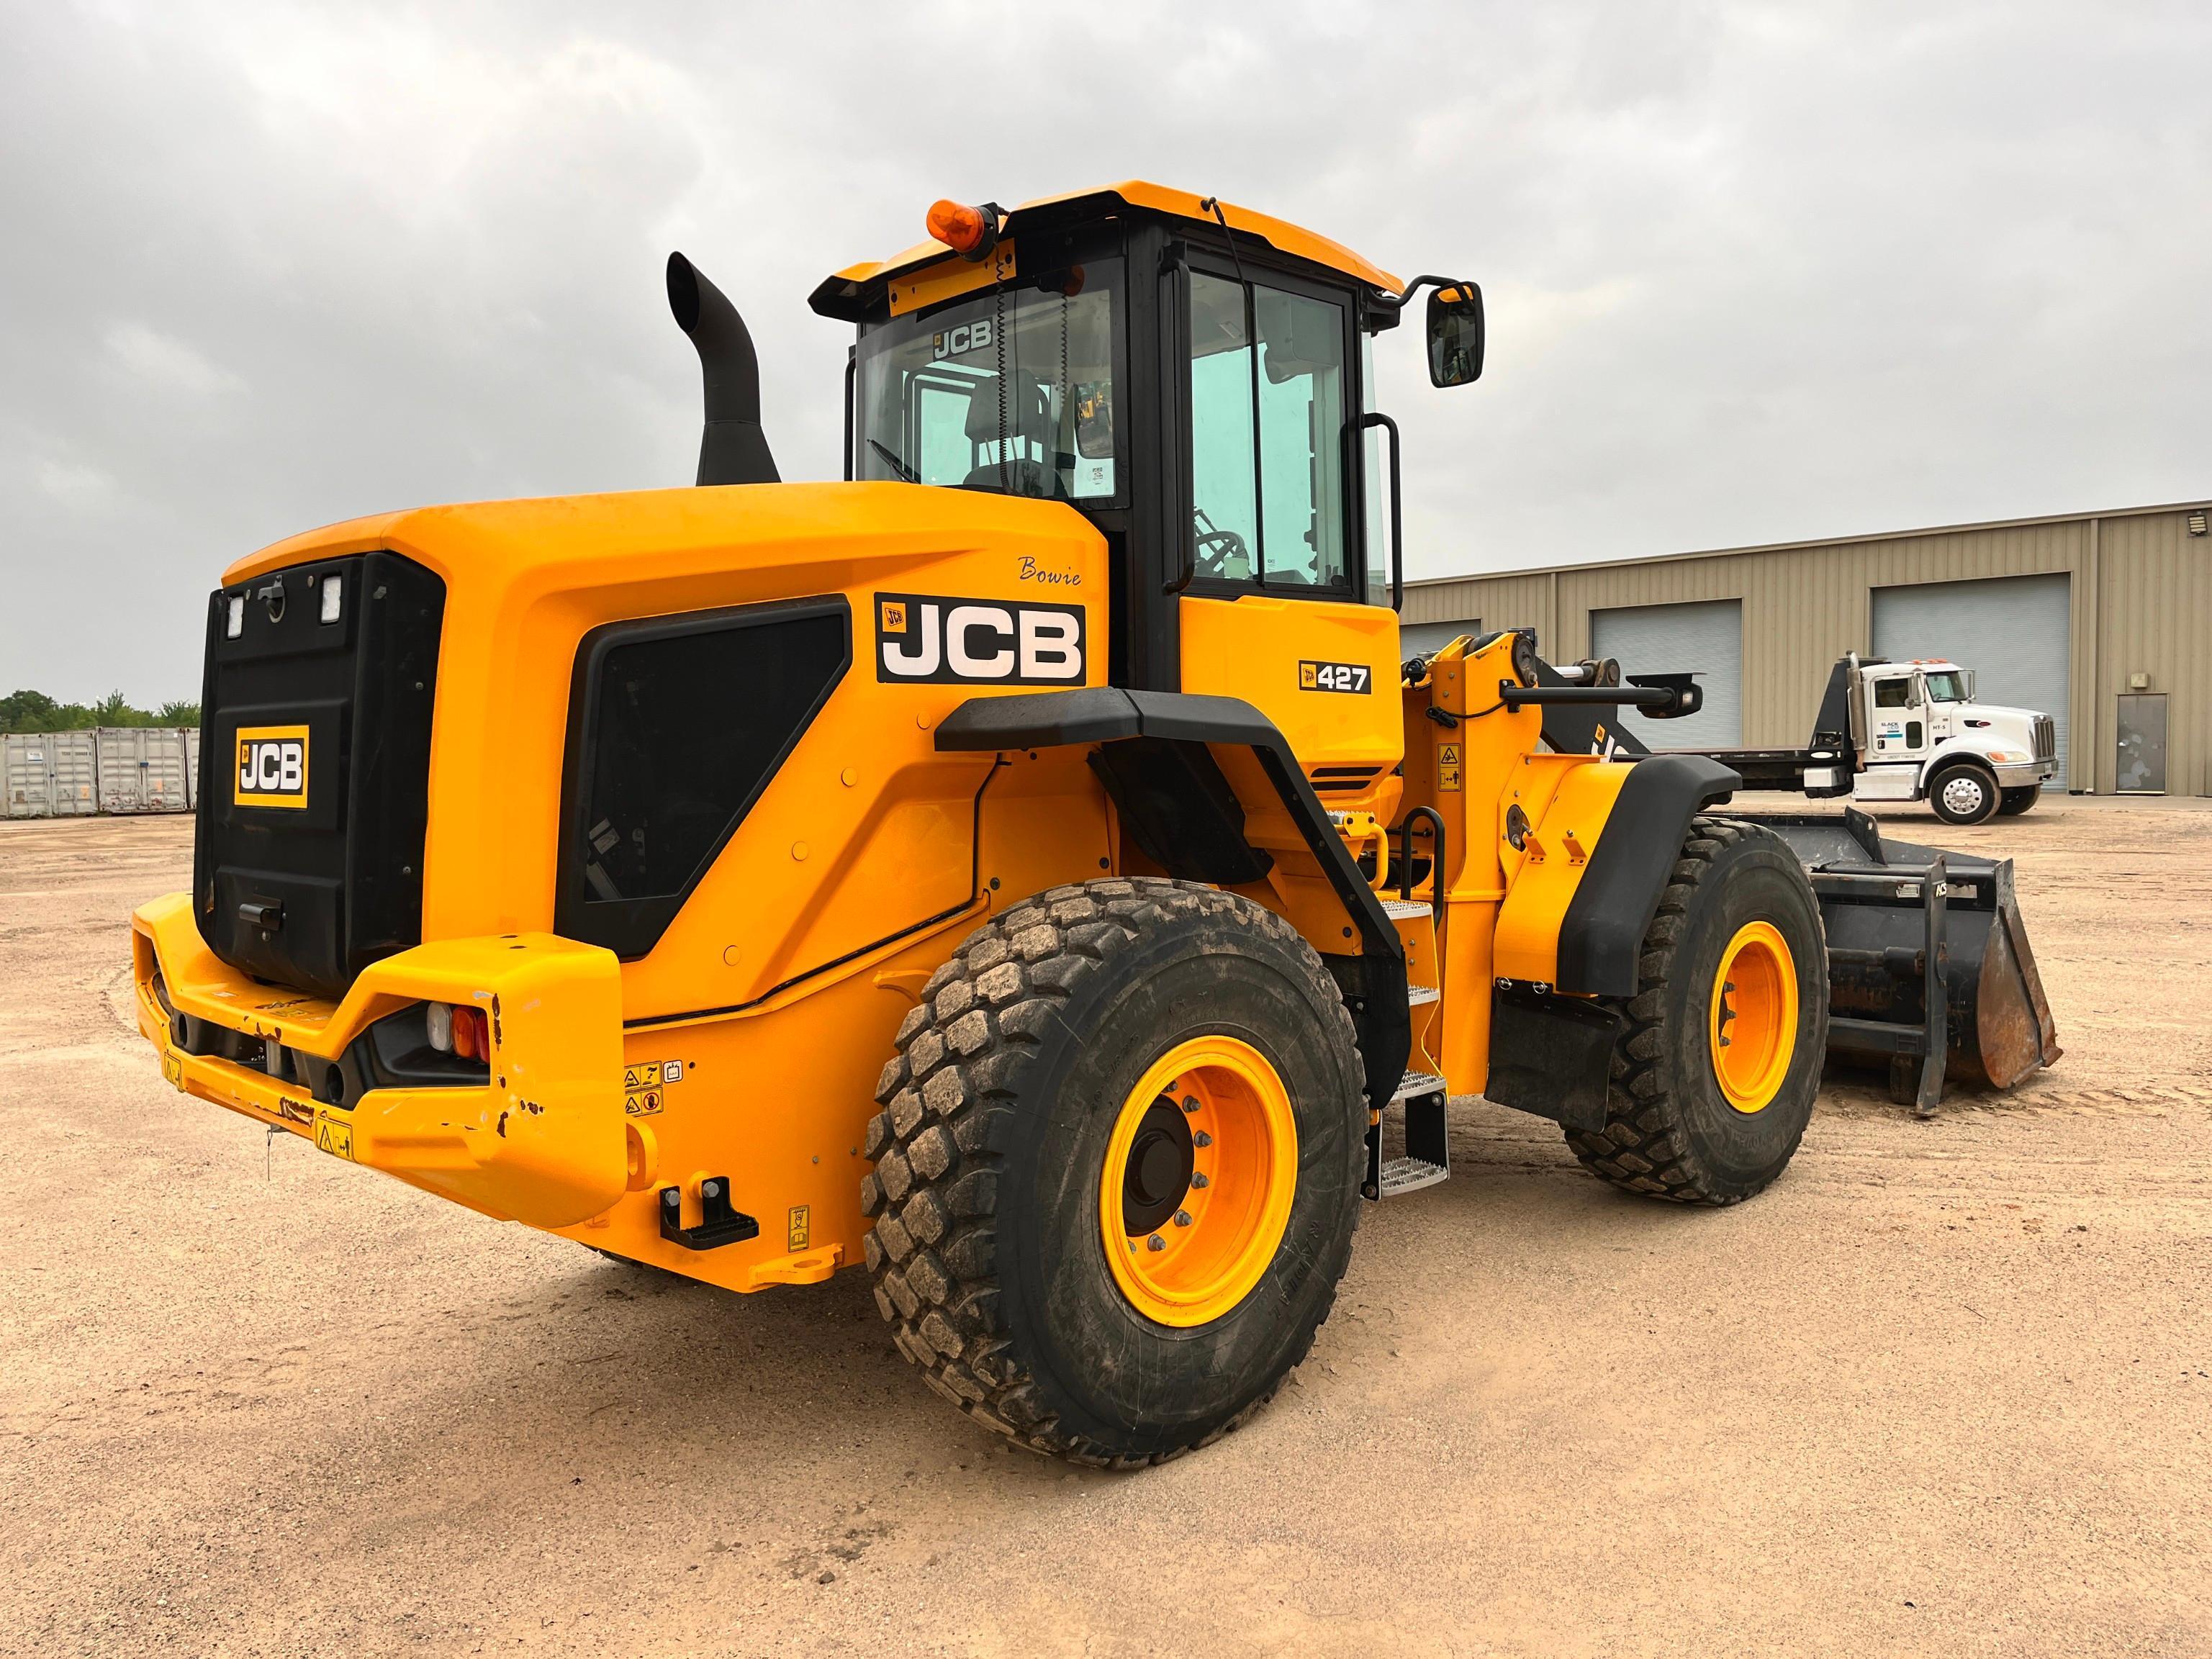 2021 JCB 427ZX RUBBER TIRED LOADER SN:JCB4A6AEHN3079329 powered by 6.7 liter diesel engine, equipped